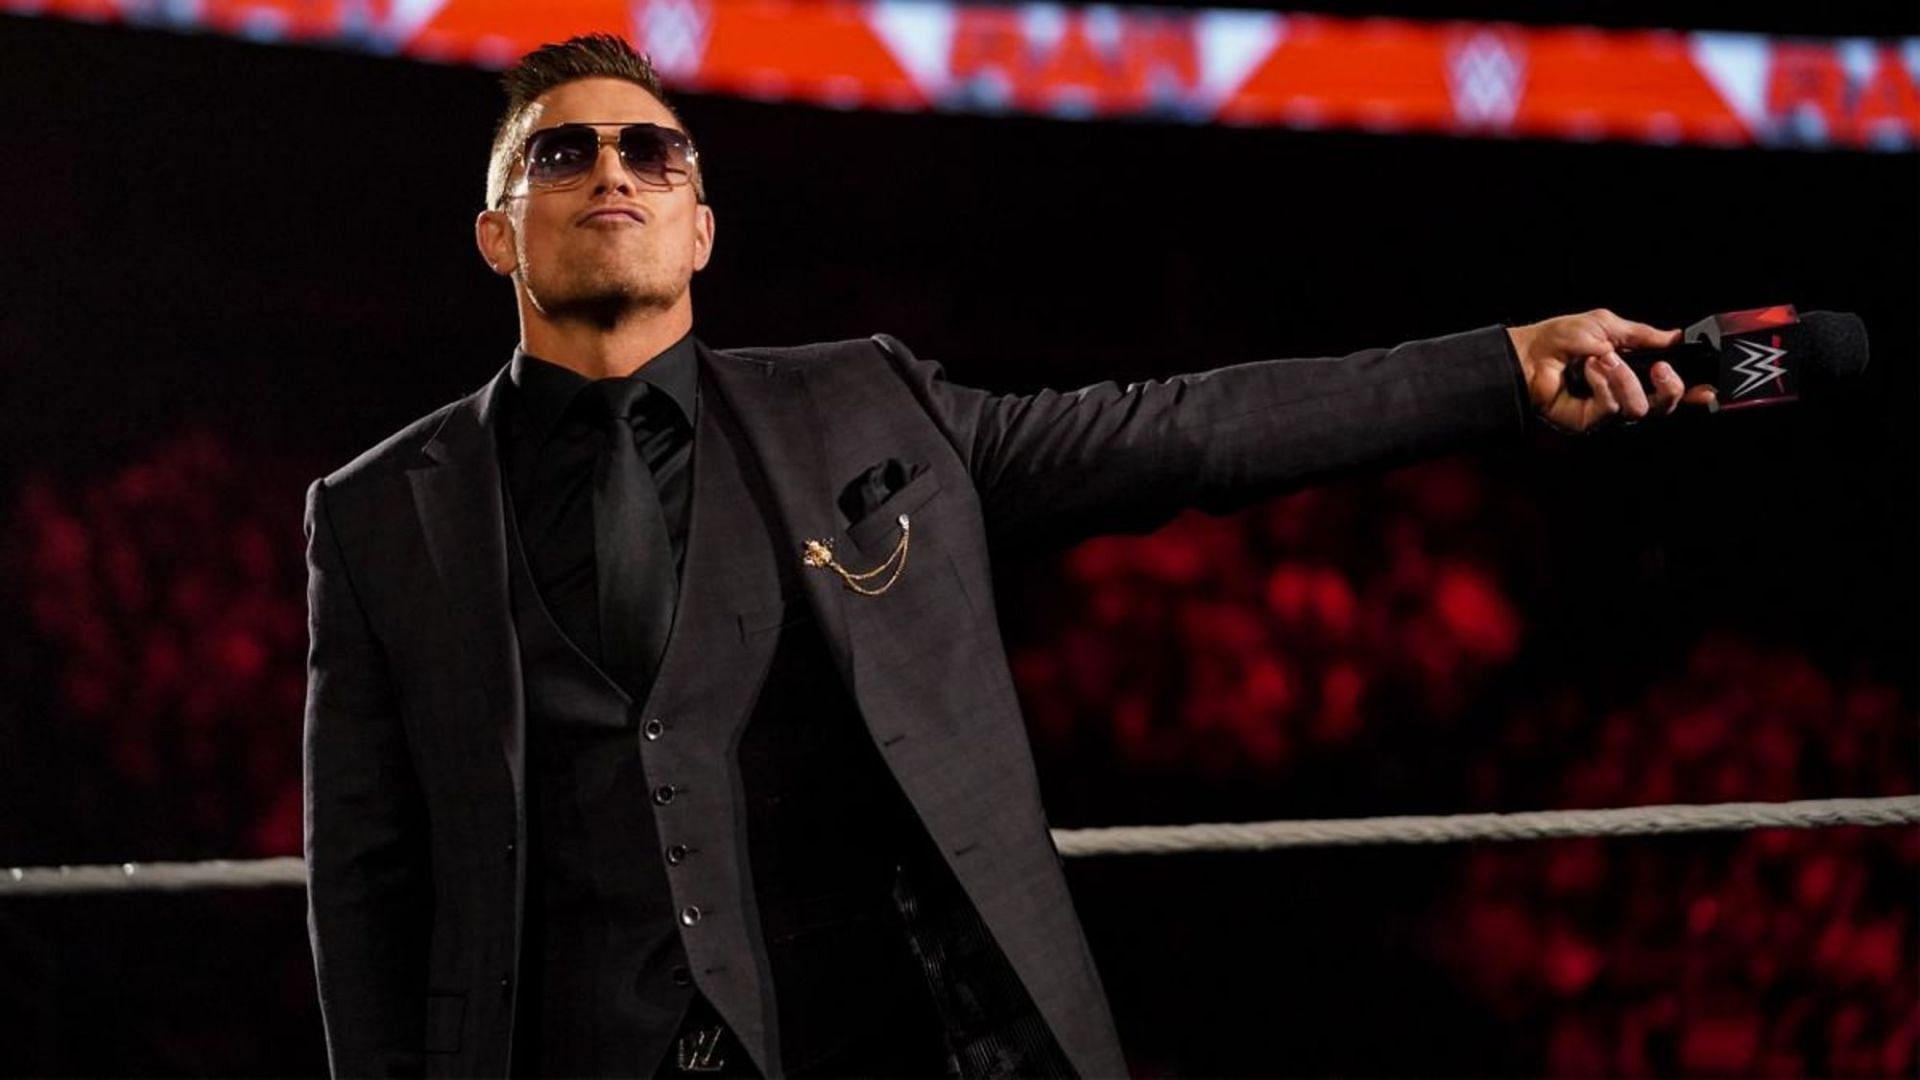 The Miz is a decorated WWE Superstar